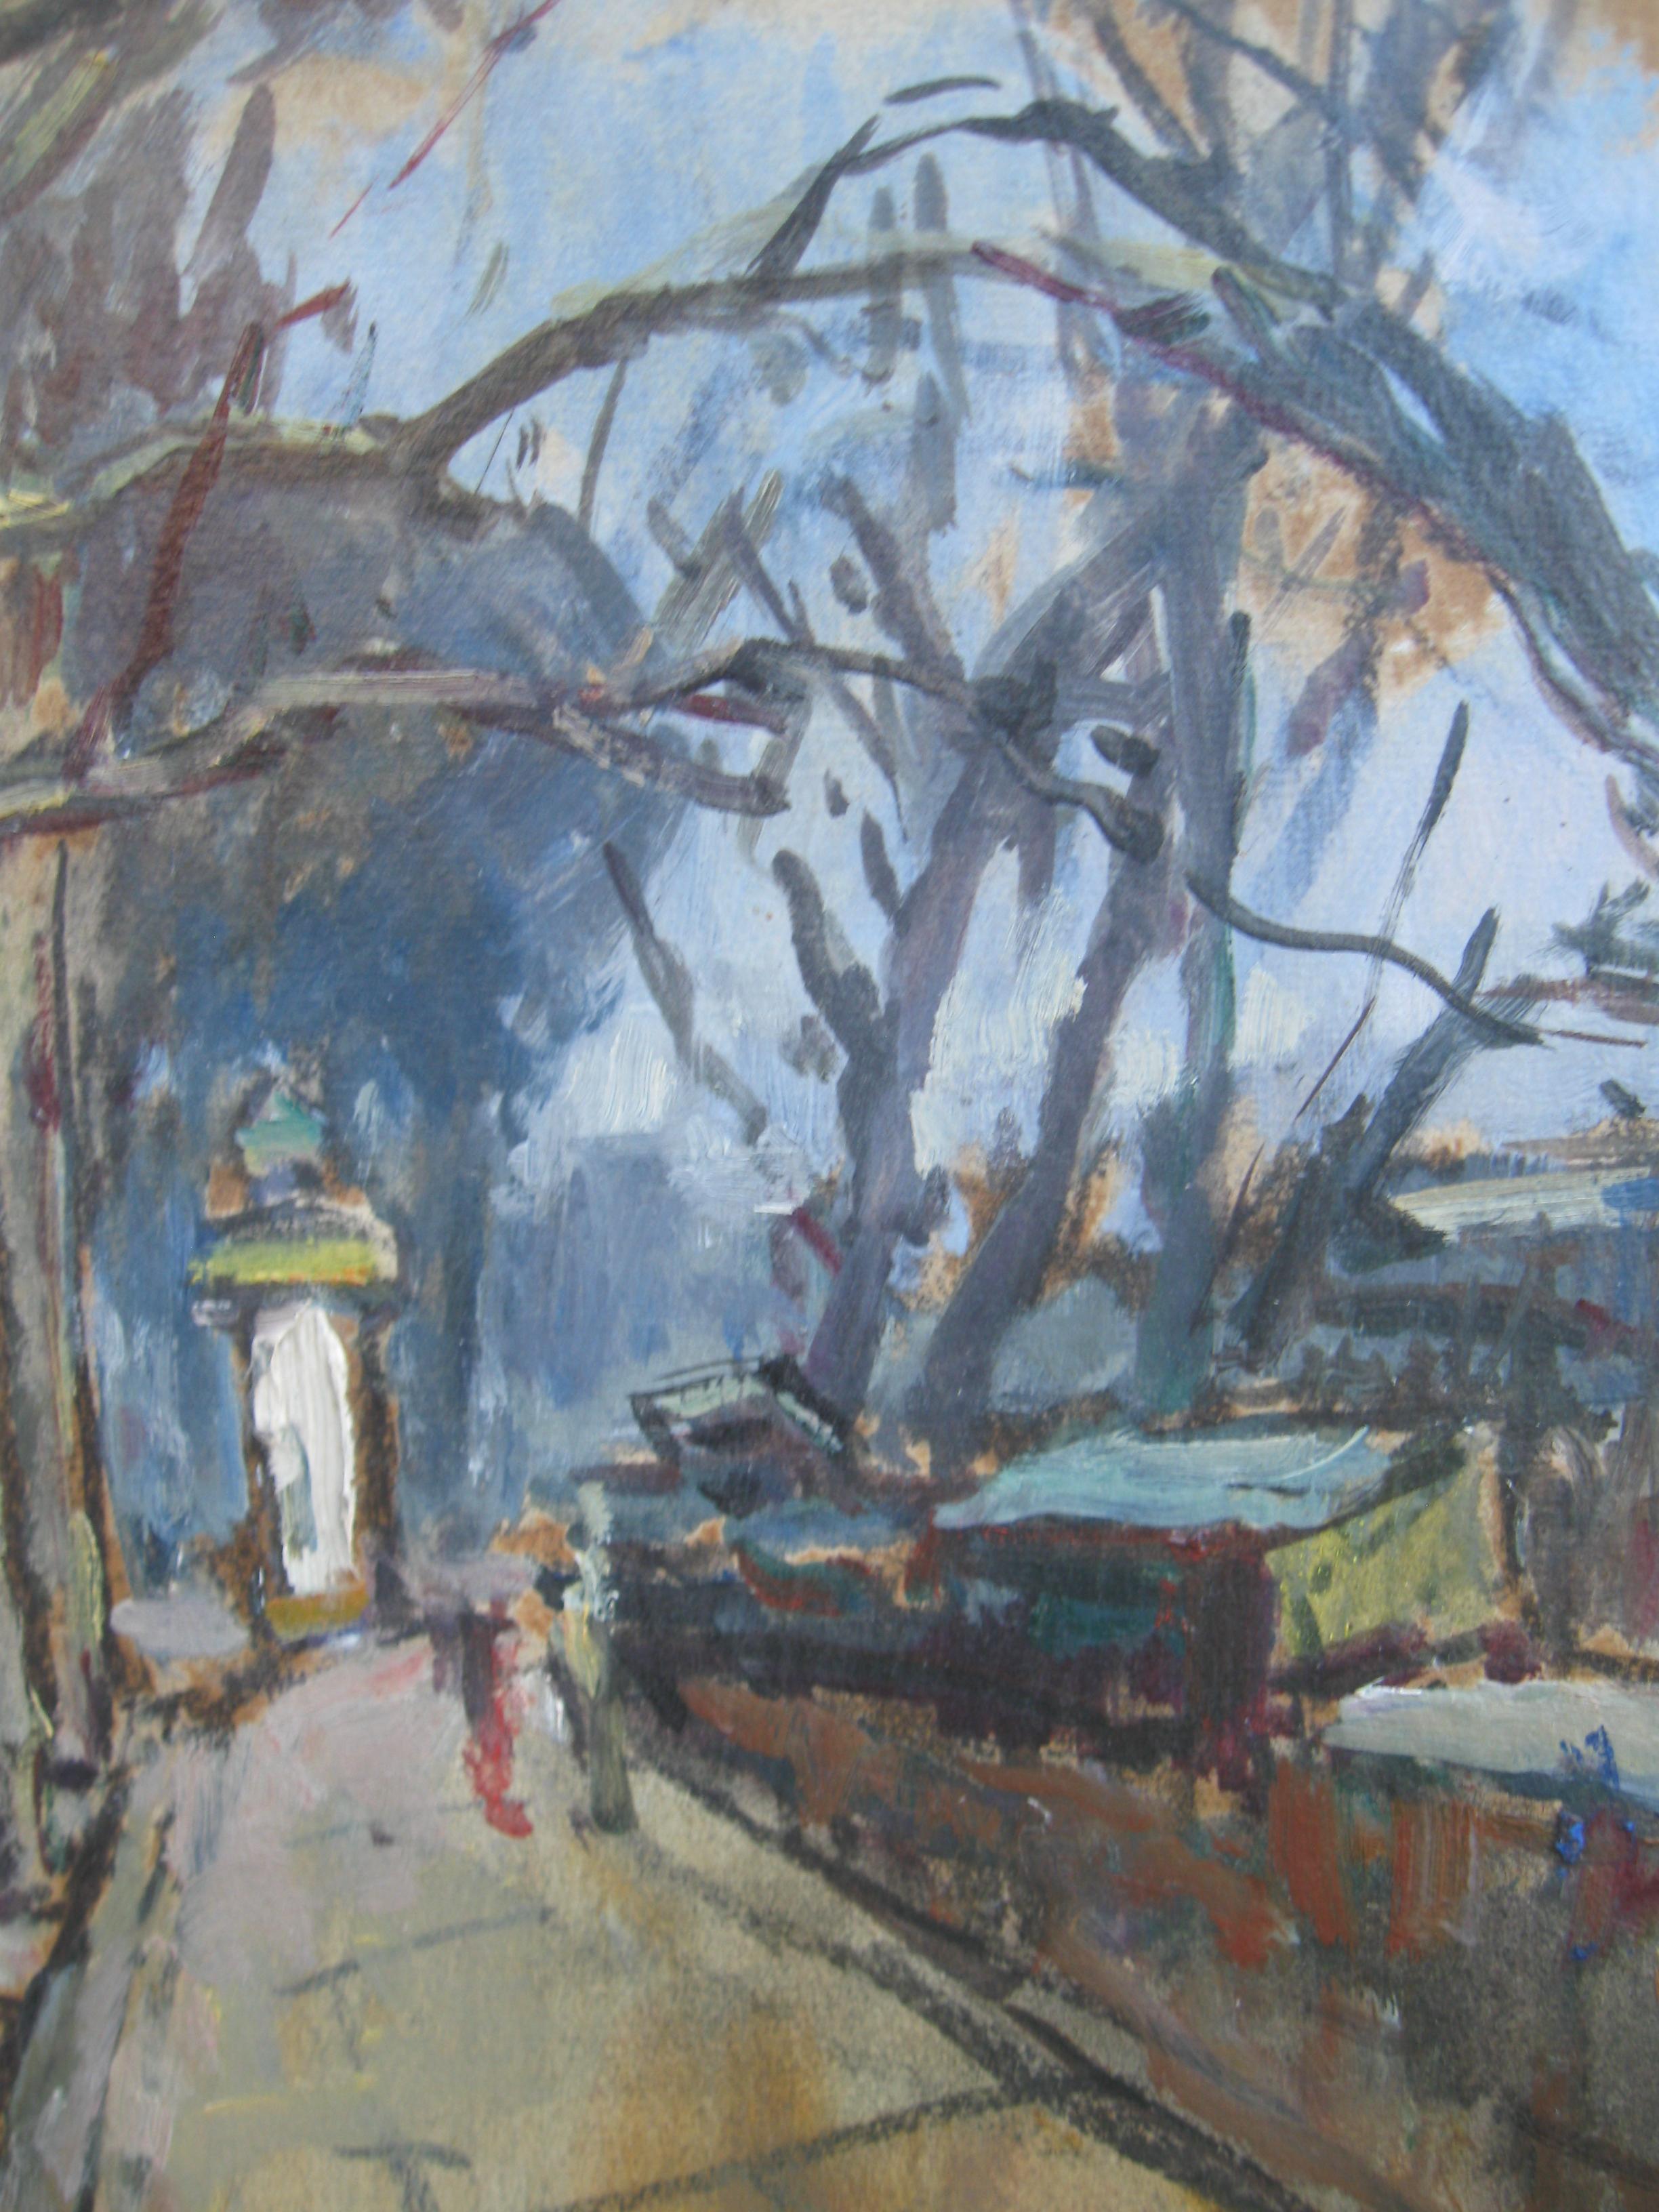 French Impressionist: Paris Street Scene near The river Seine oil circa 1950's - Gray Landscape Painting by Maurice Fongueuse